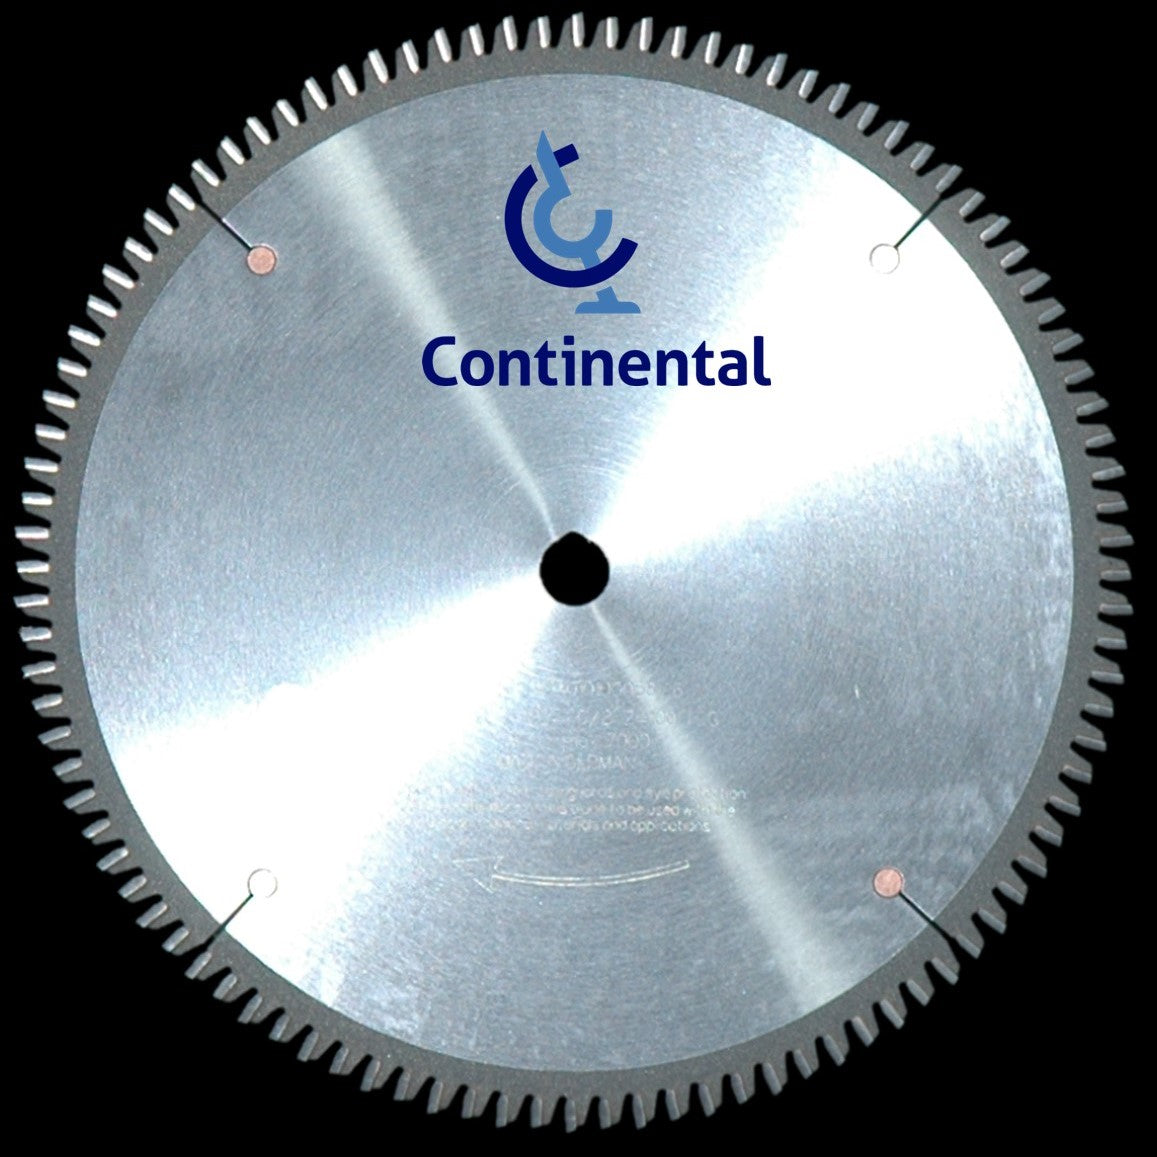 C-1210A Continental Saw Blade 12"x100 tooth 1" bore Alternate Top Bevel